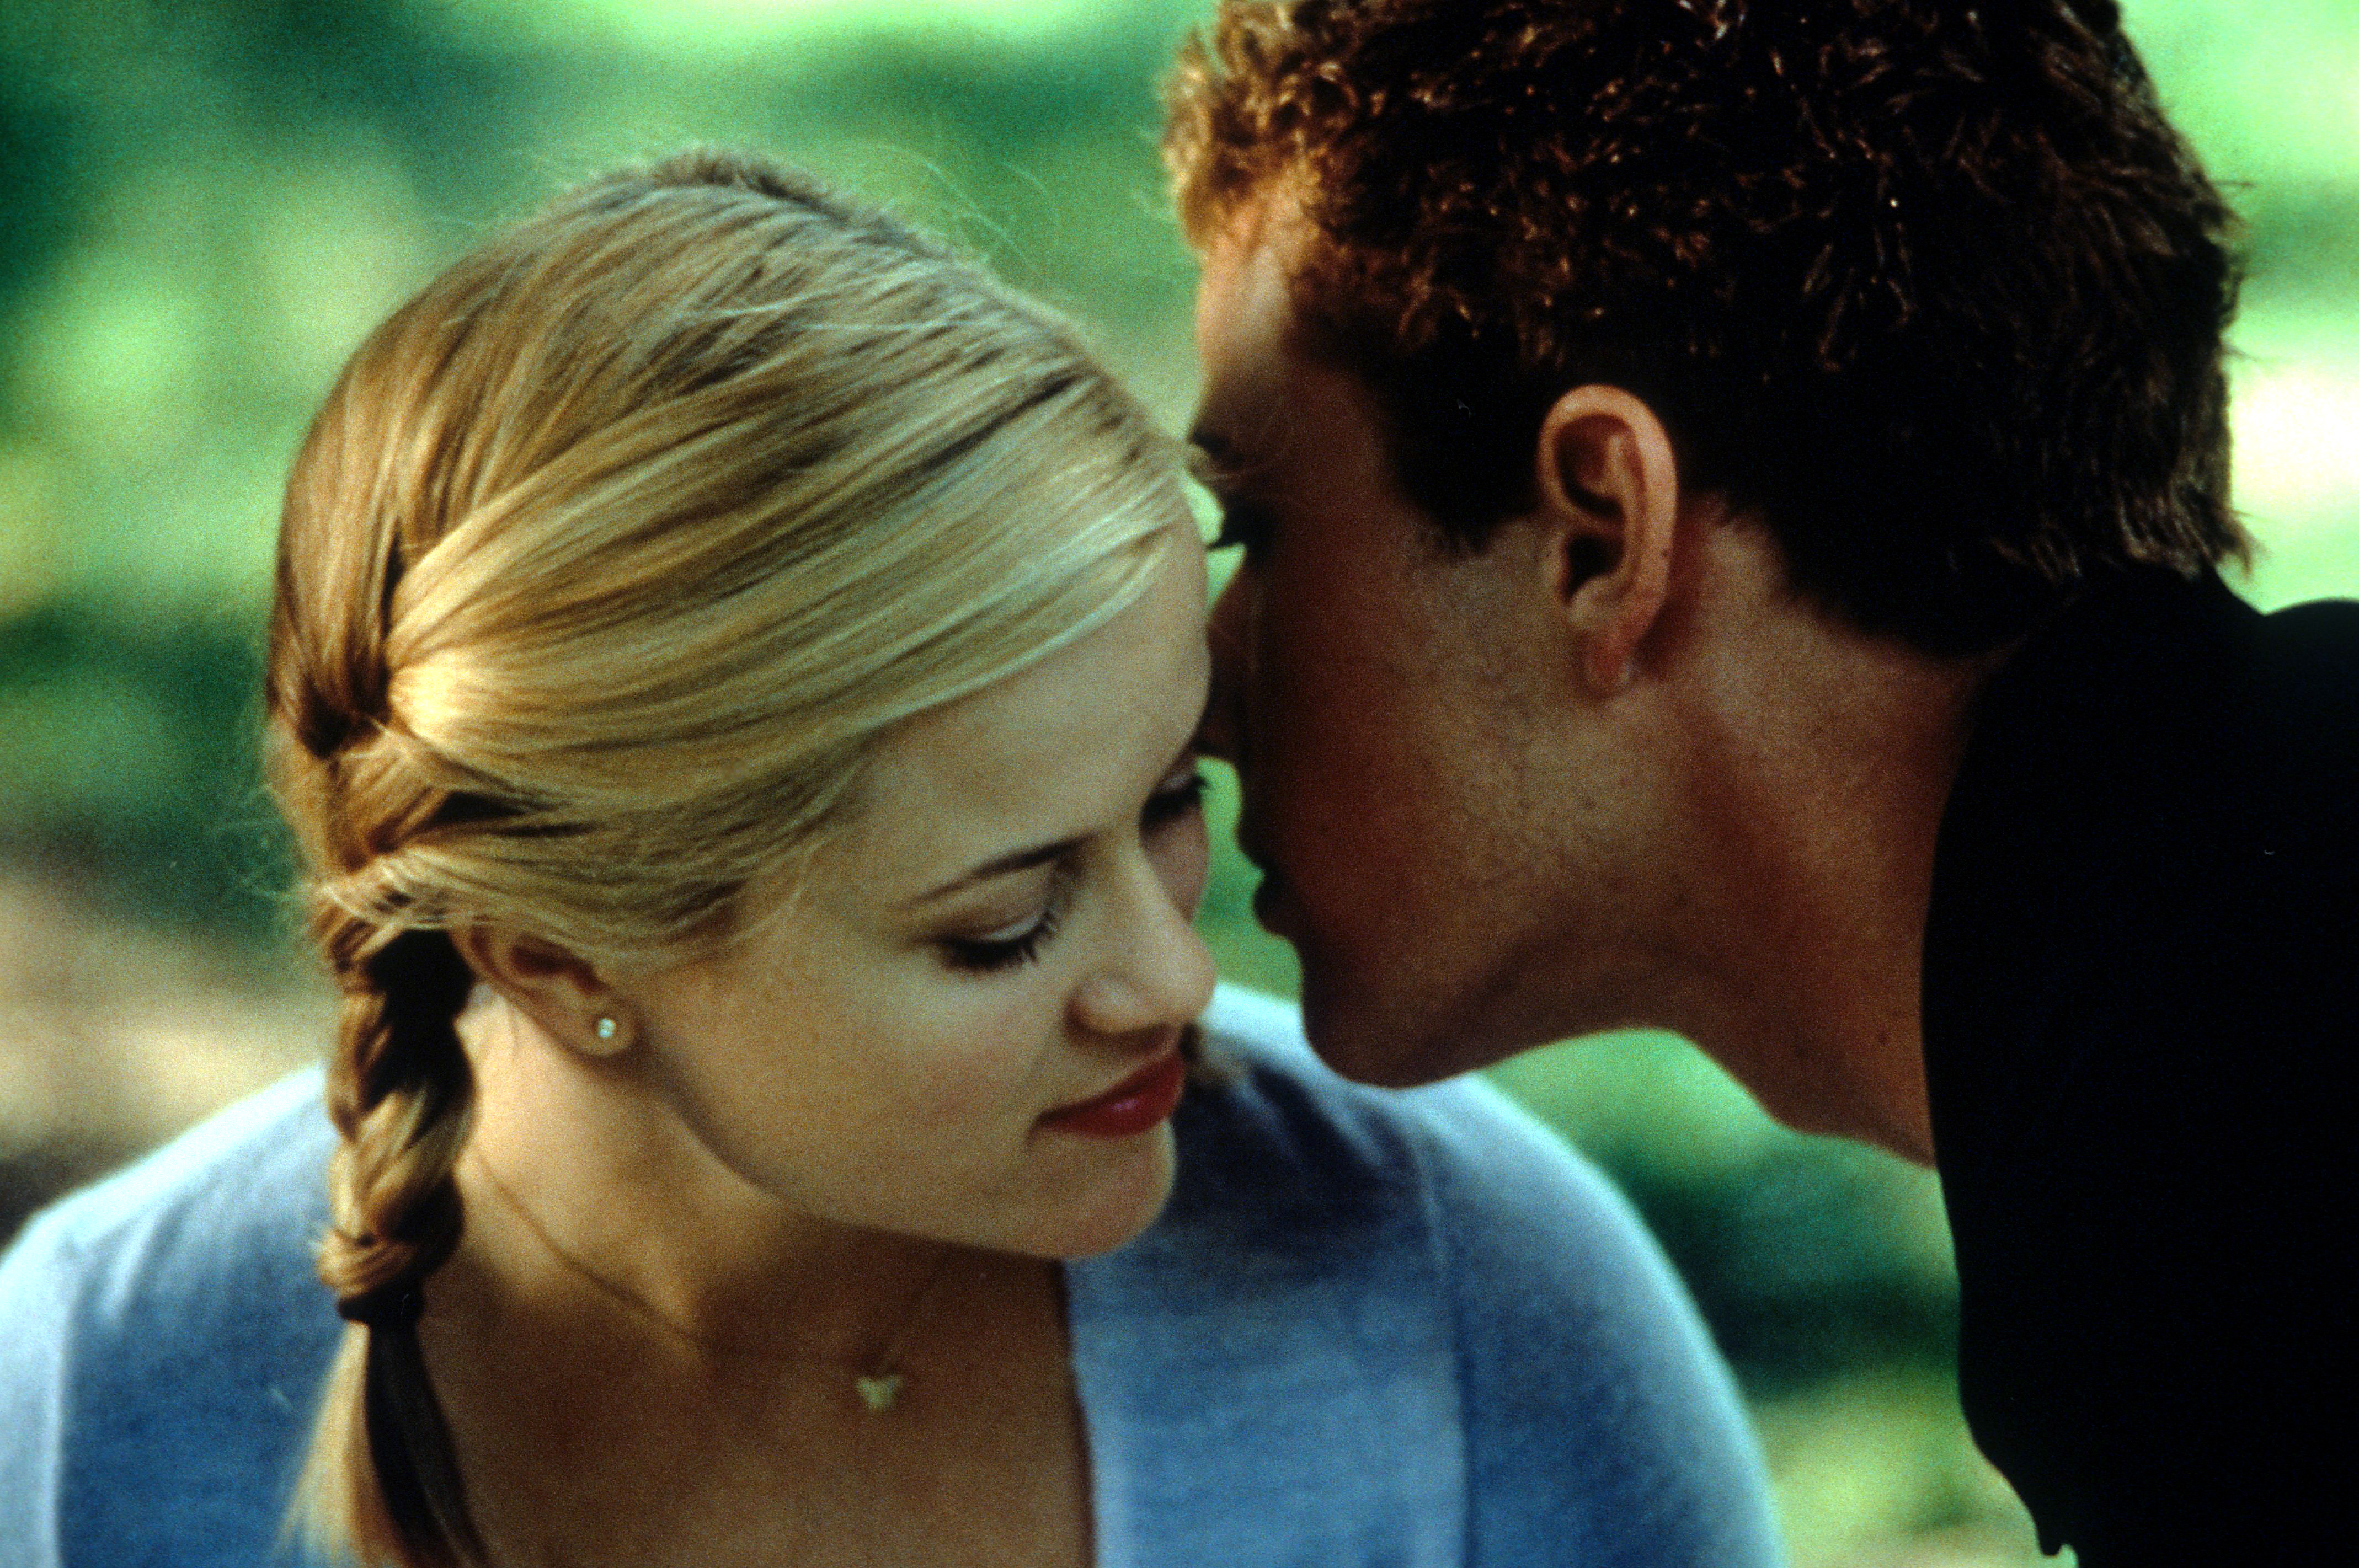 Reese Witherspoon listens as Ryan Phillippe whispers in her ear in a scene from the film 'Cruel Intentions', 1999. | Source: Getty Images